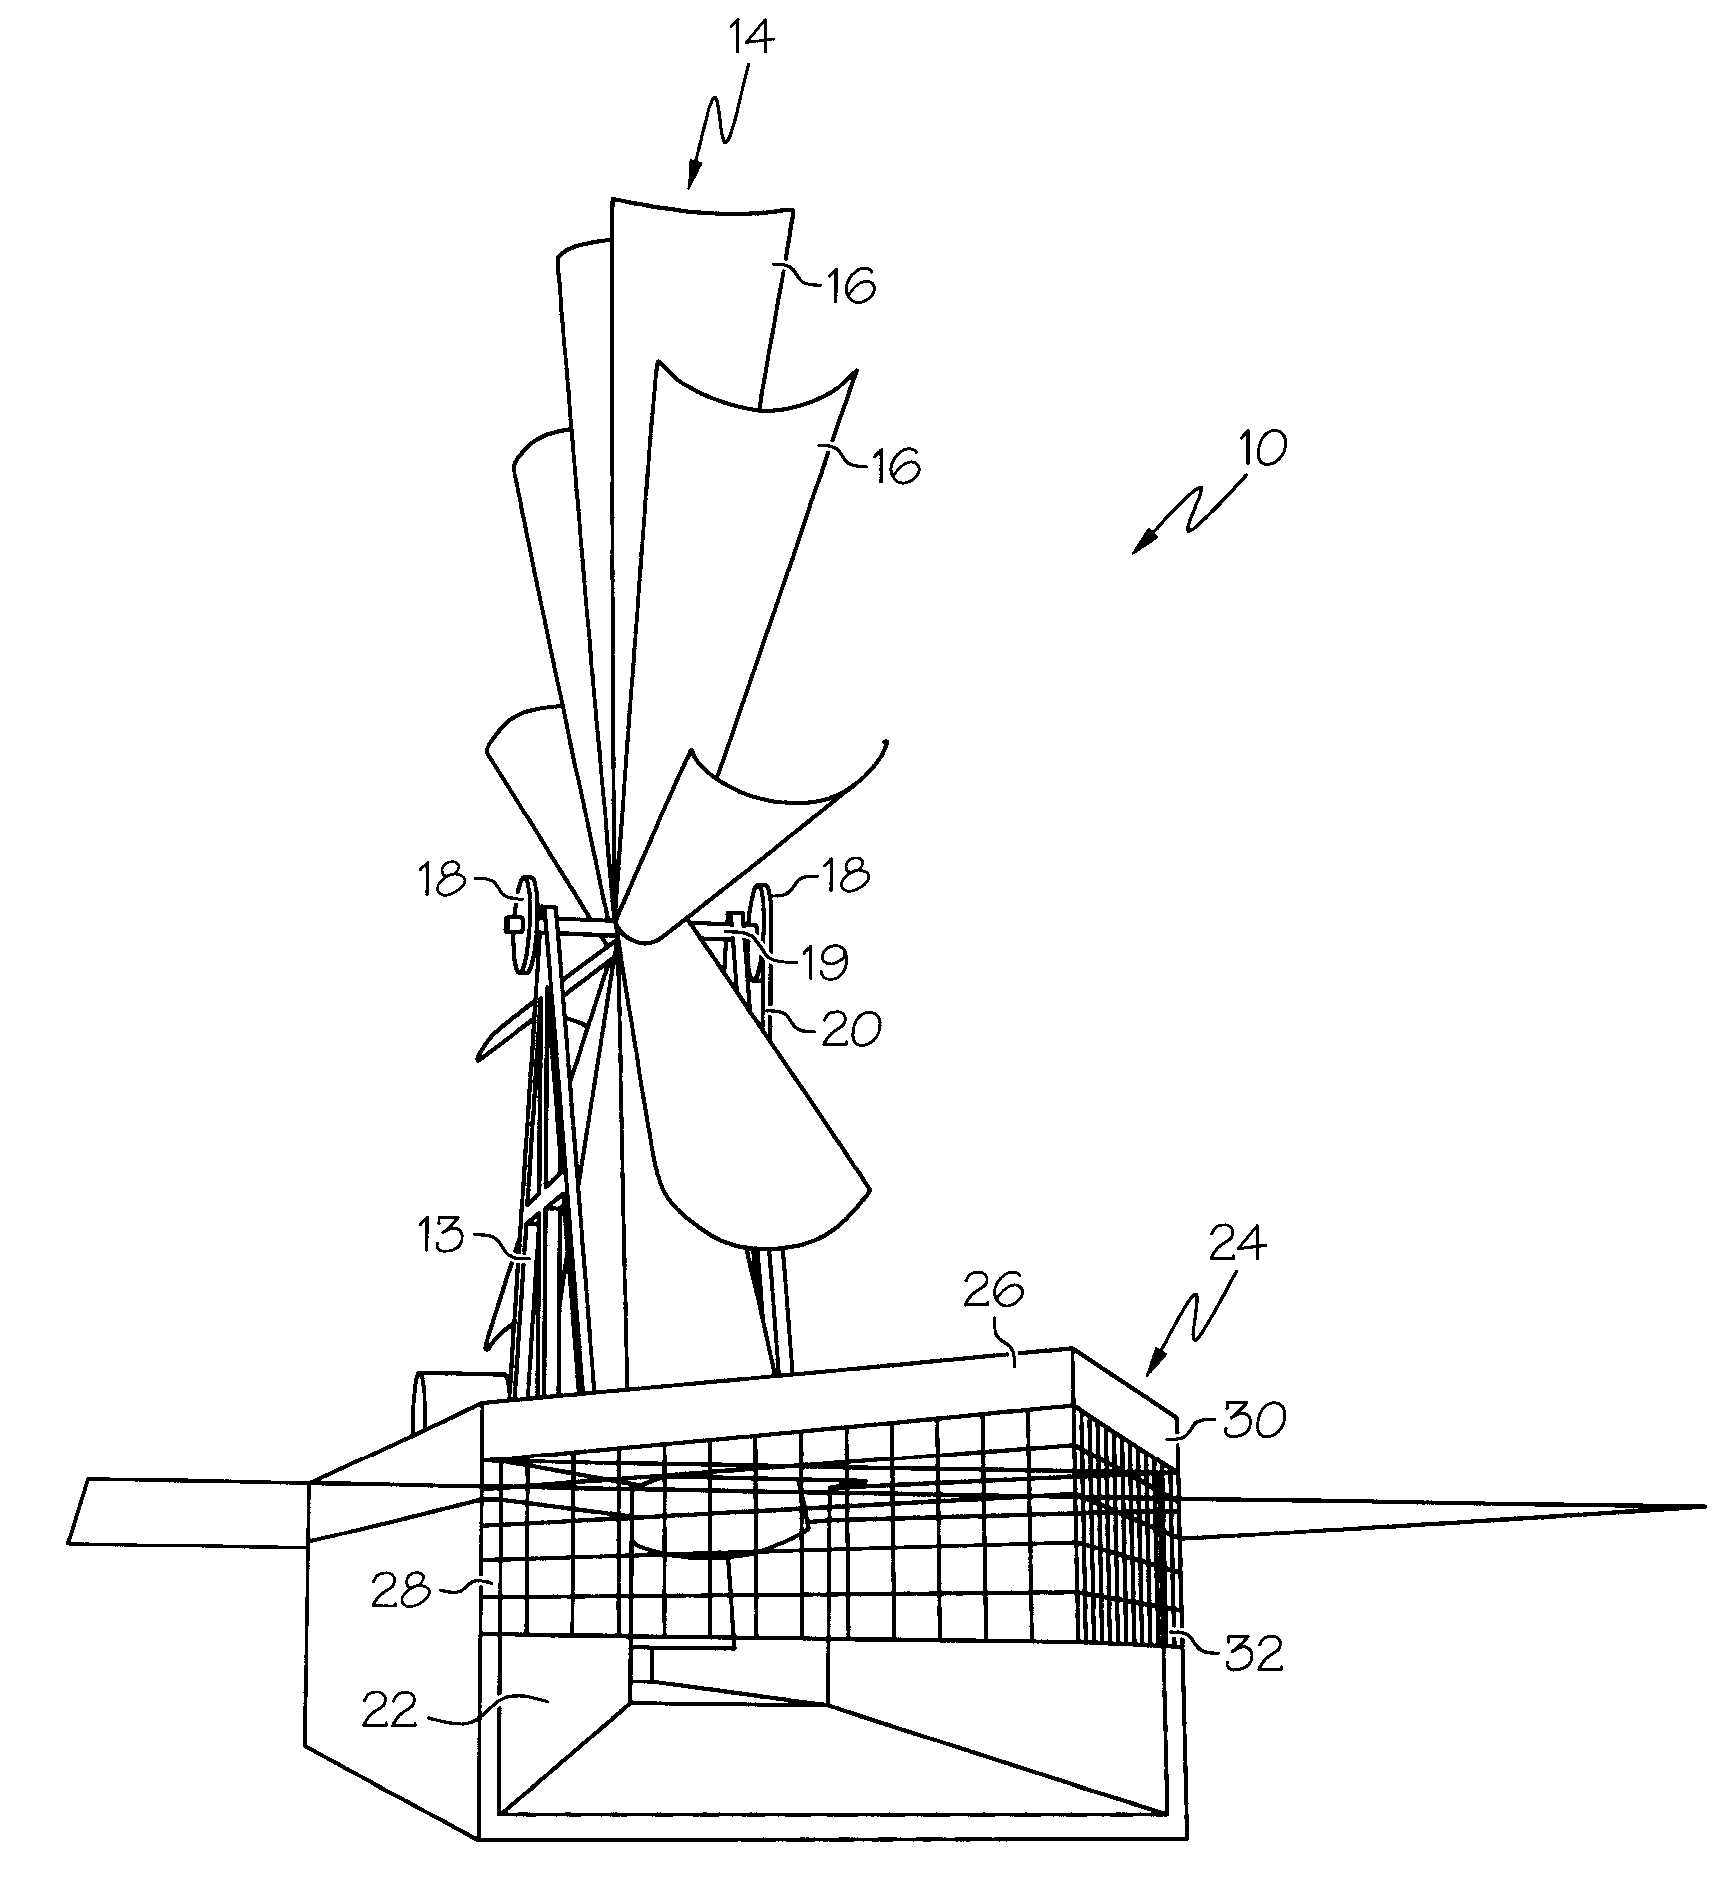 Hydroelectric device